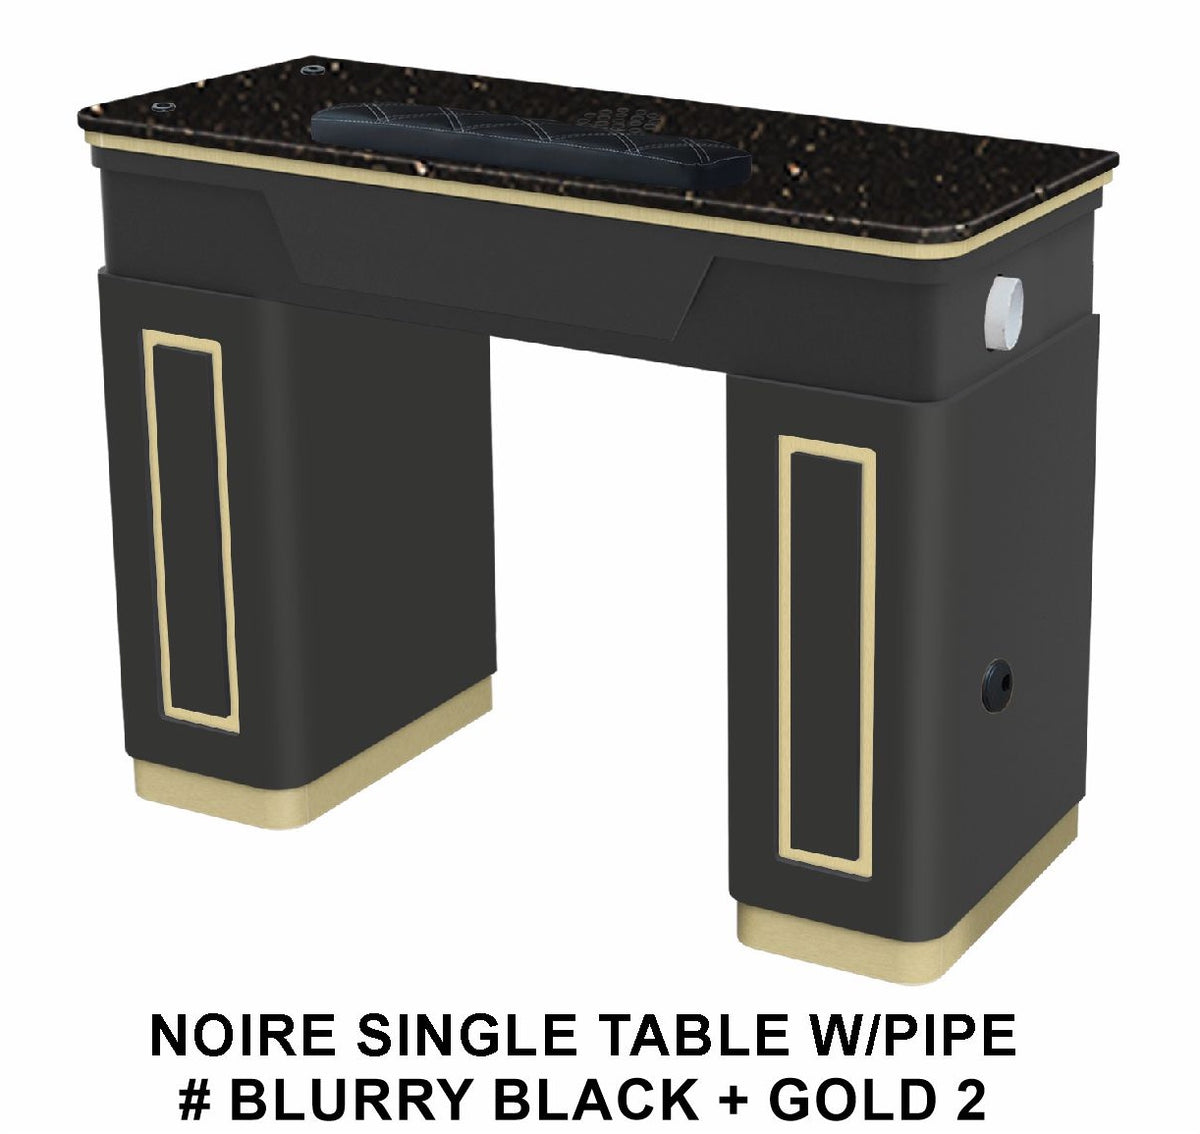 Noire single nail table vent pipe 2.5 inch